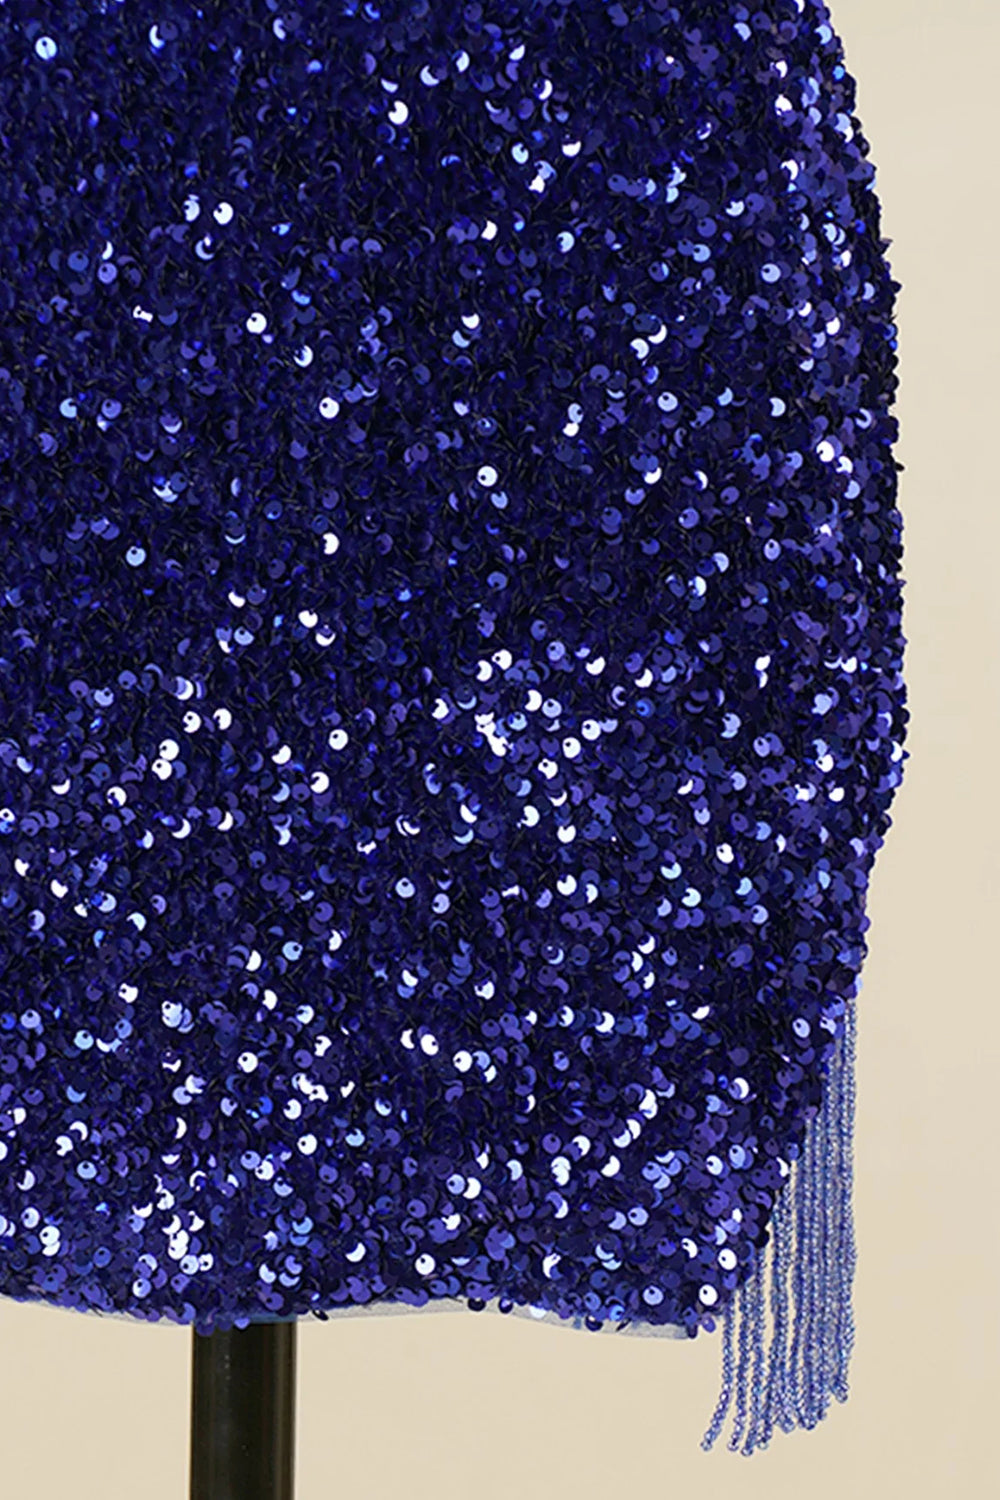 Royal Blue Sequined Tight Homecoming Dress with Fringes